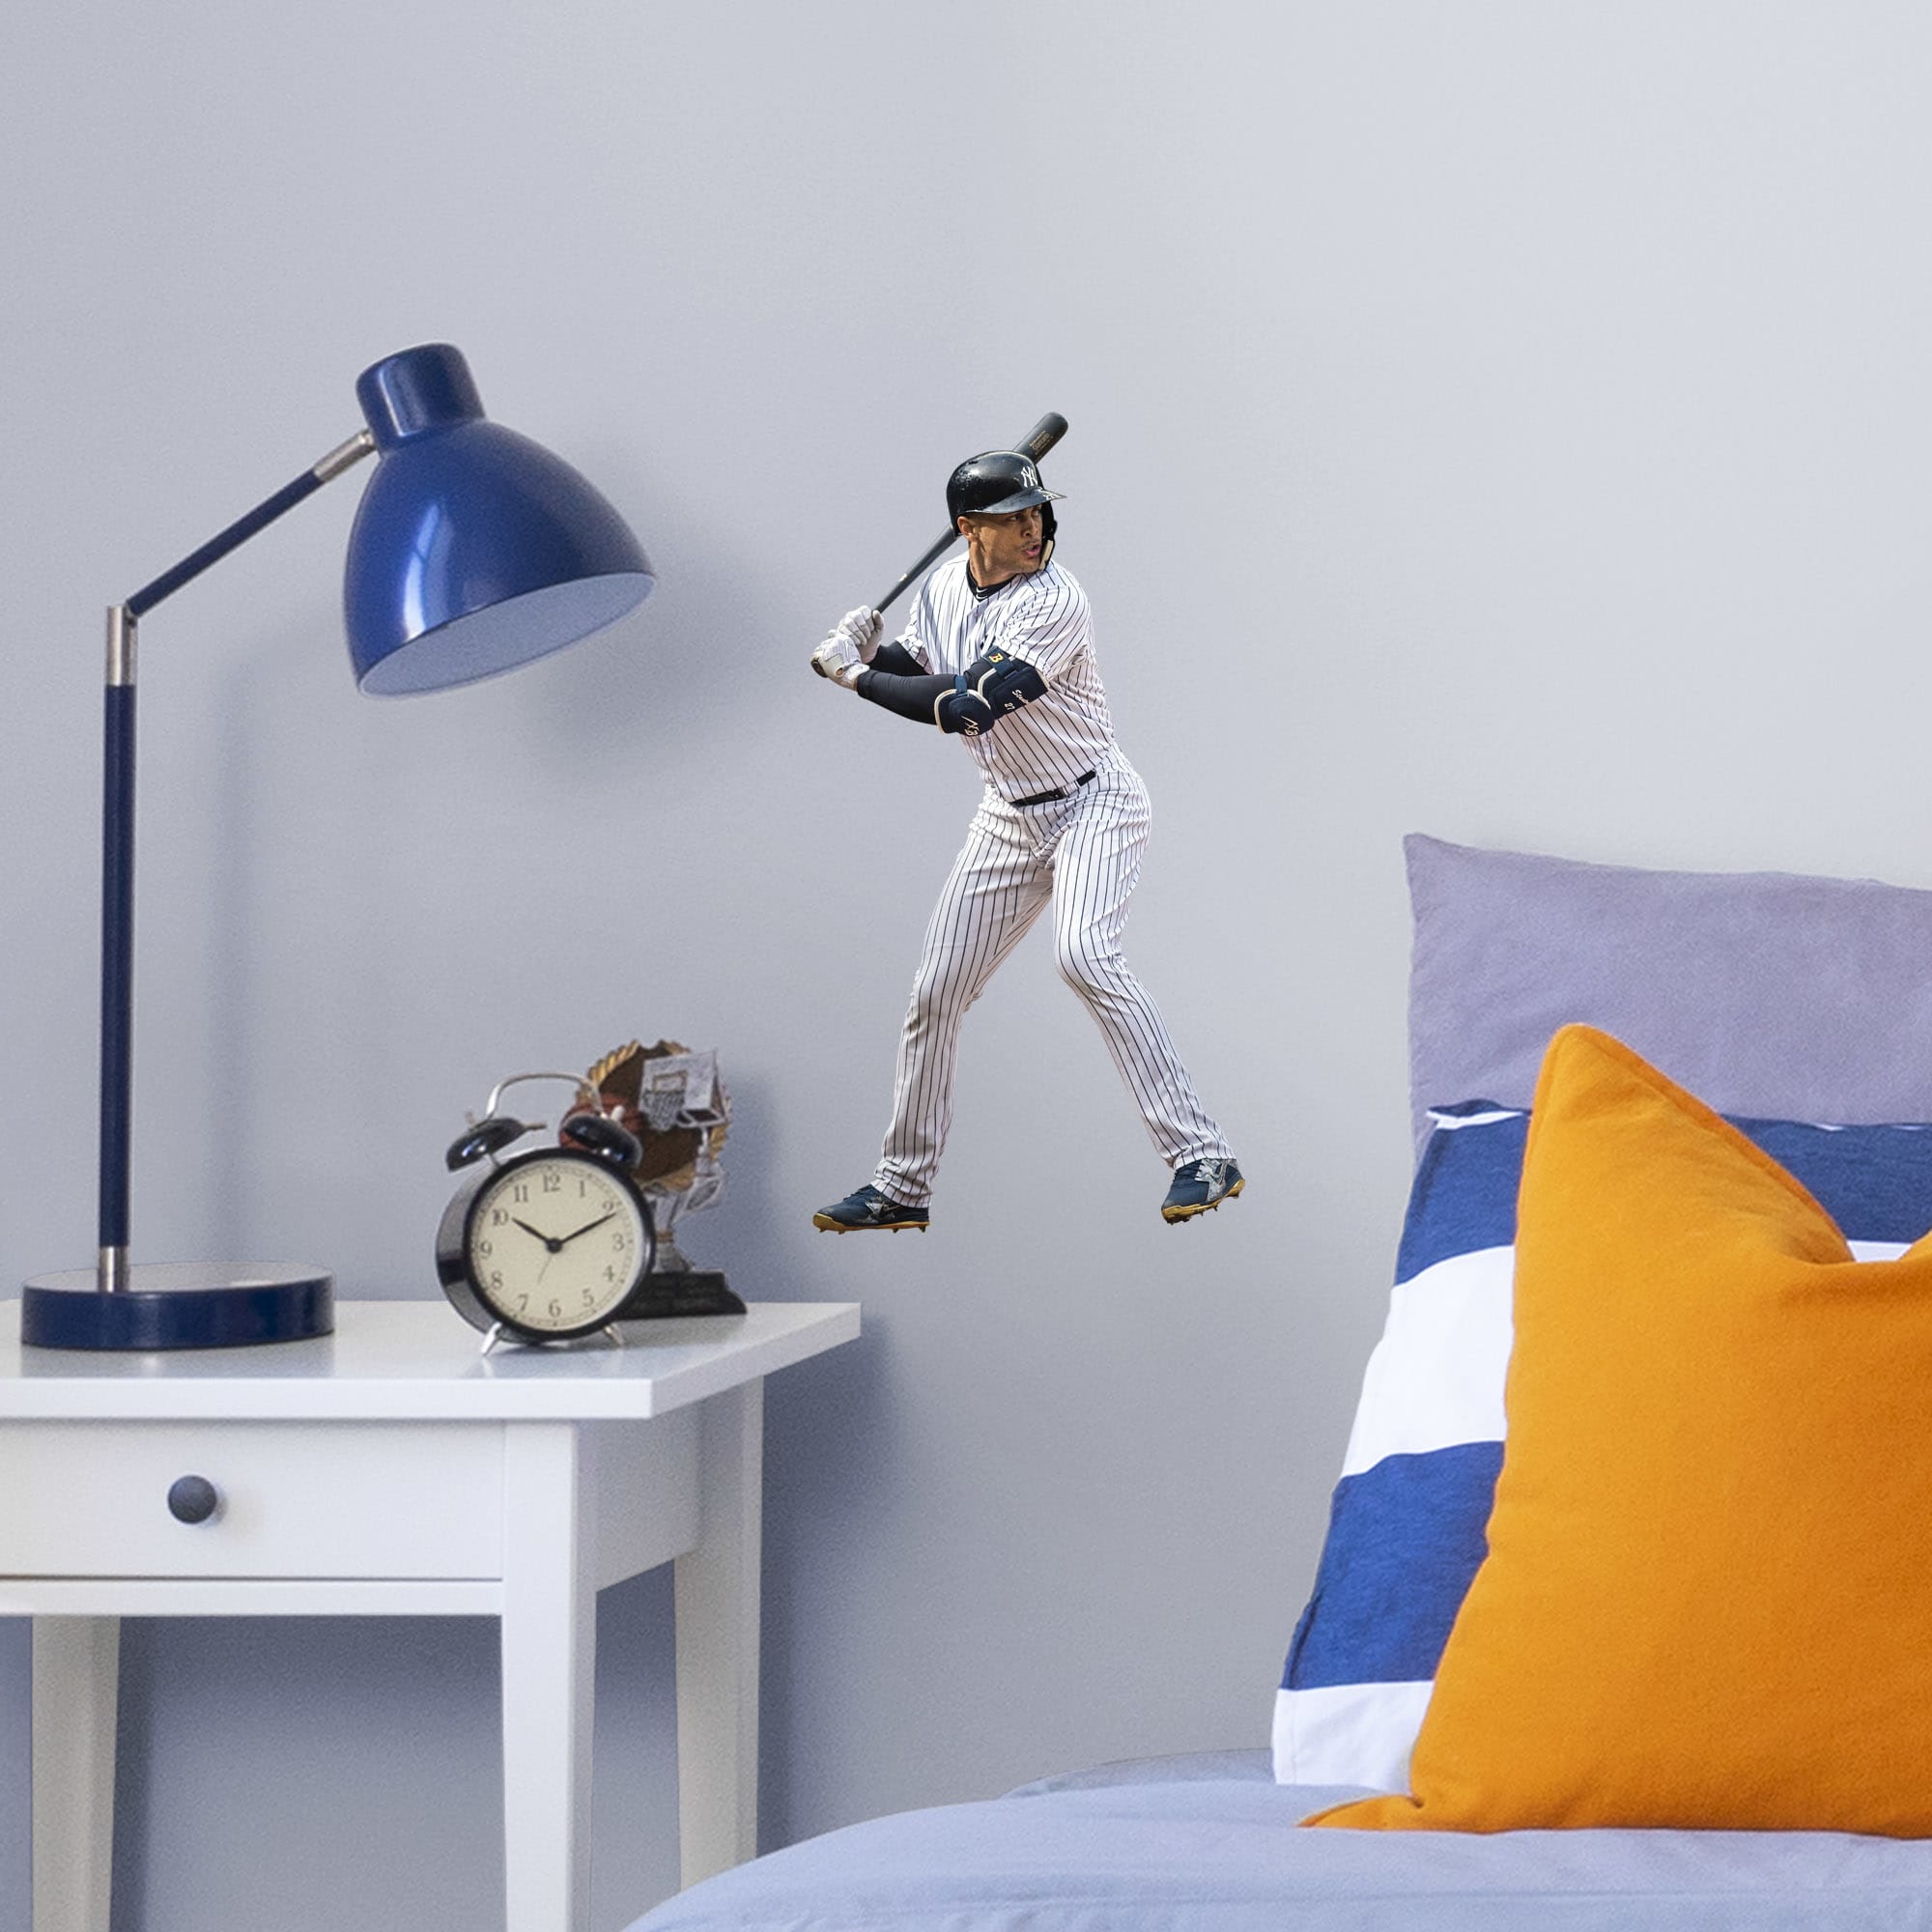 Giancarlo Stanton for New York Yankees - Officially Licensed MLB Removable Wall Decal Large by Fathead | Vinyl